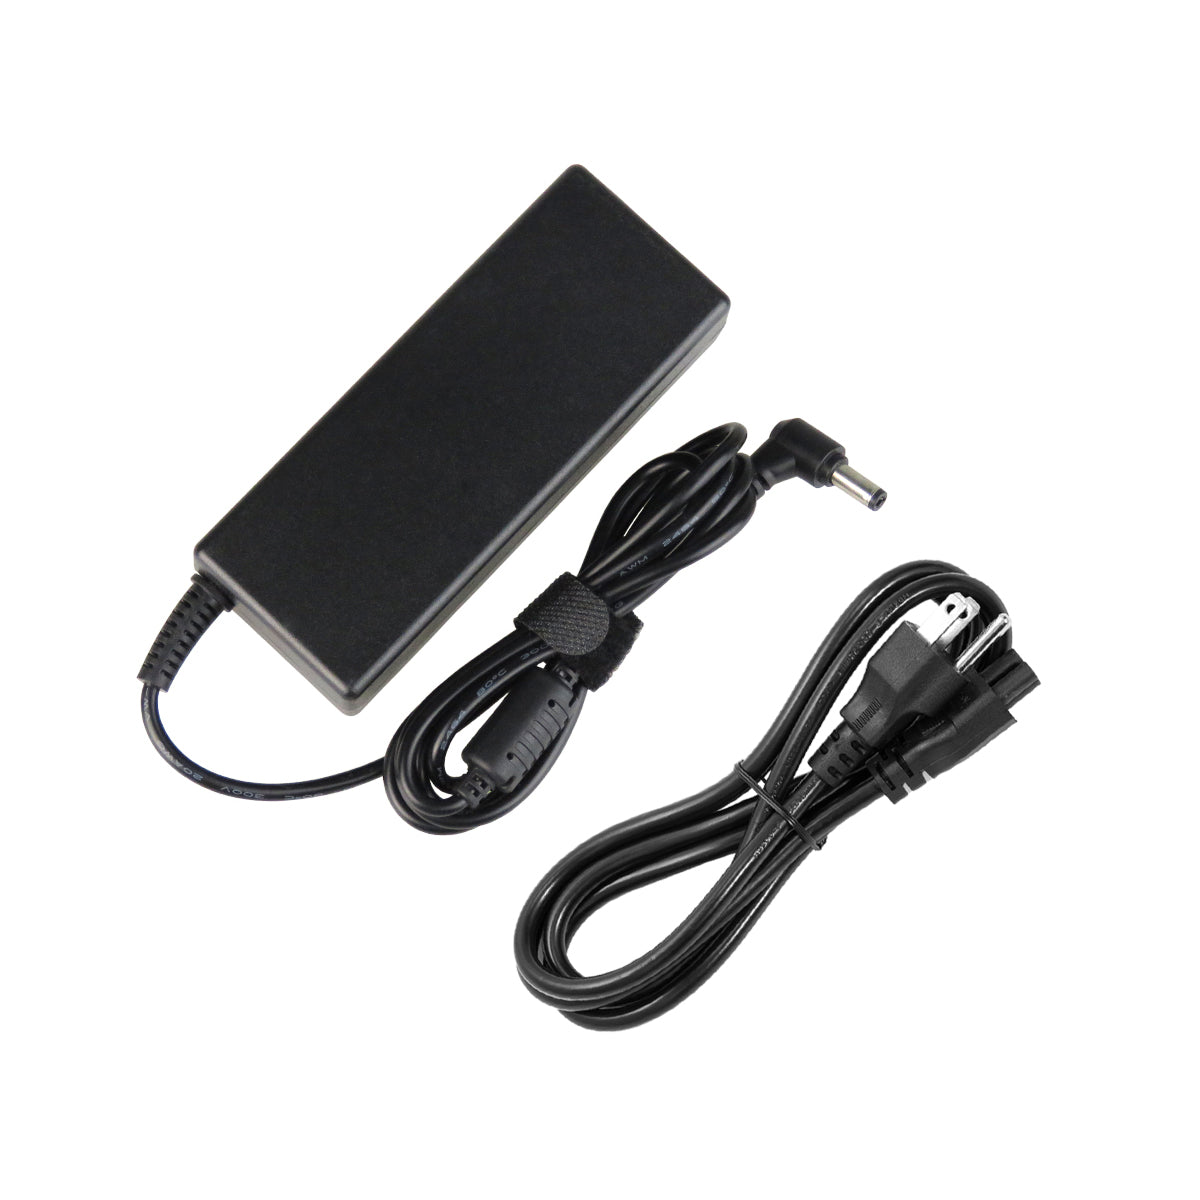 AC Adapter Charger for ASUS X55SV Notebook.